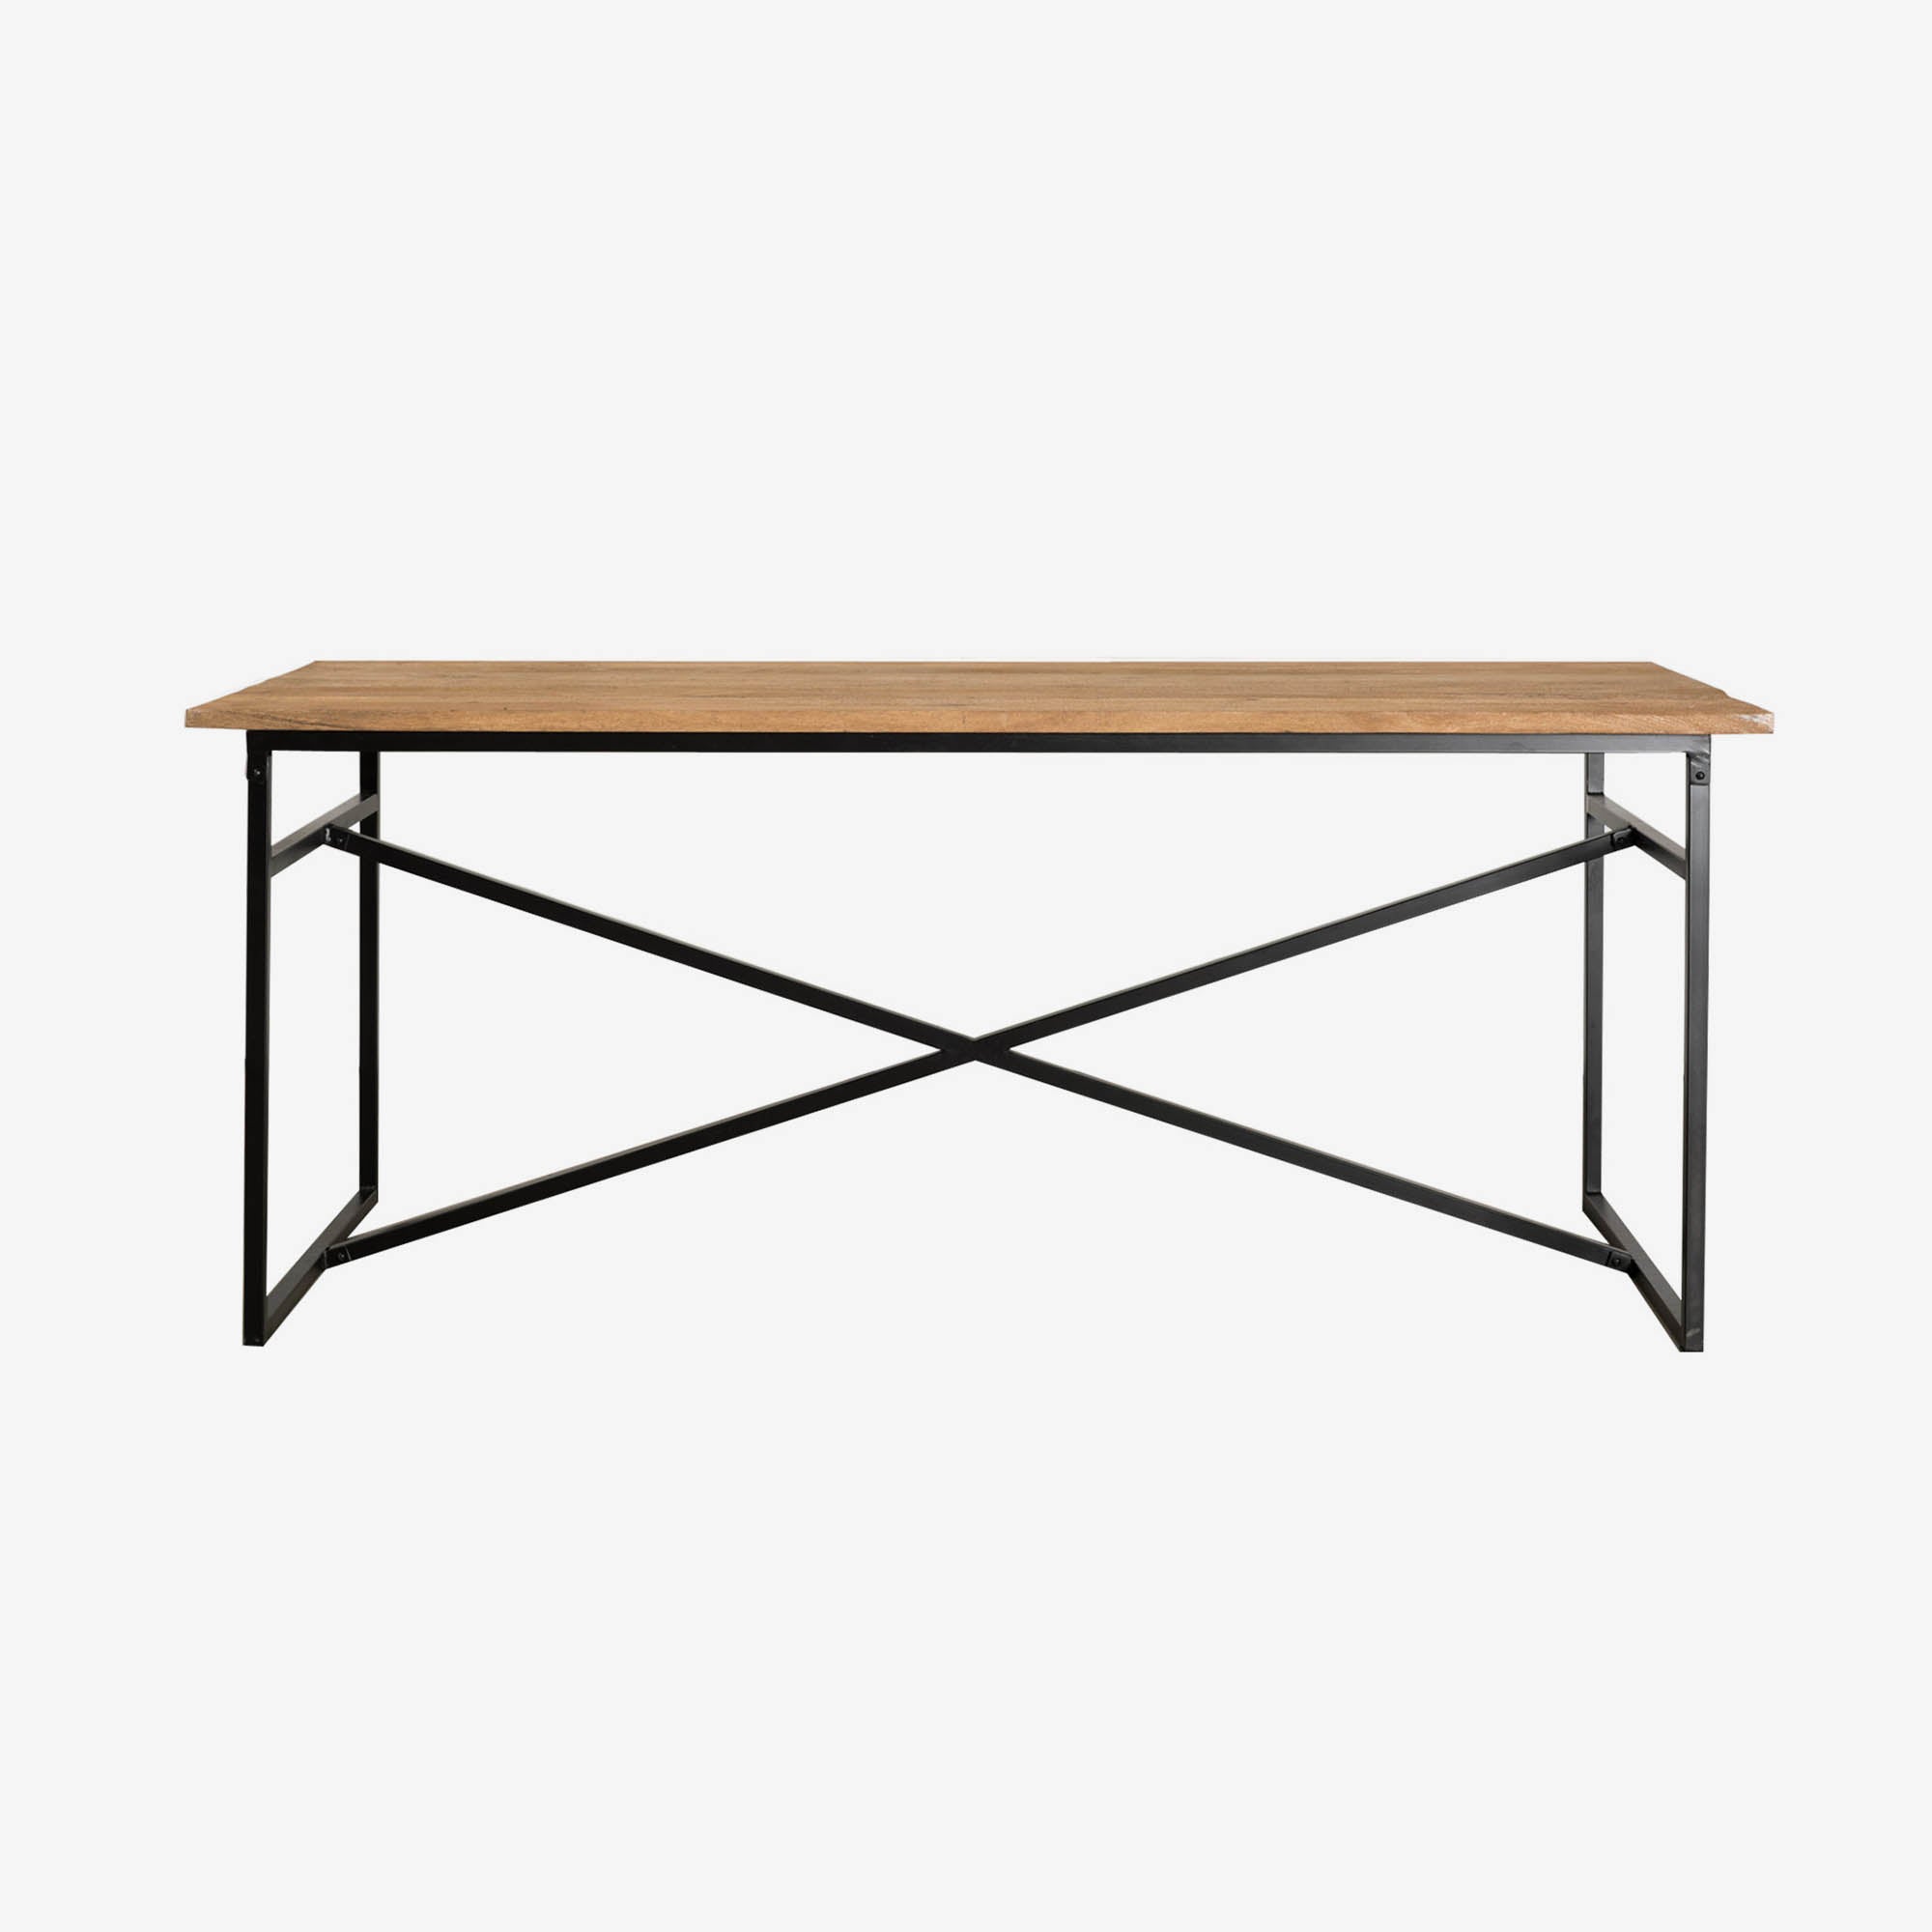 Webster table – 190x90x78cm